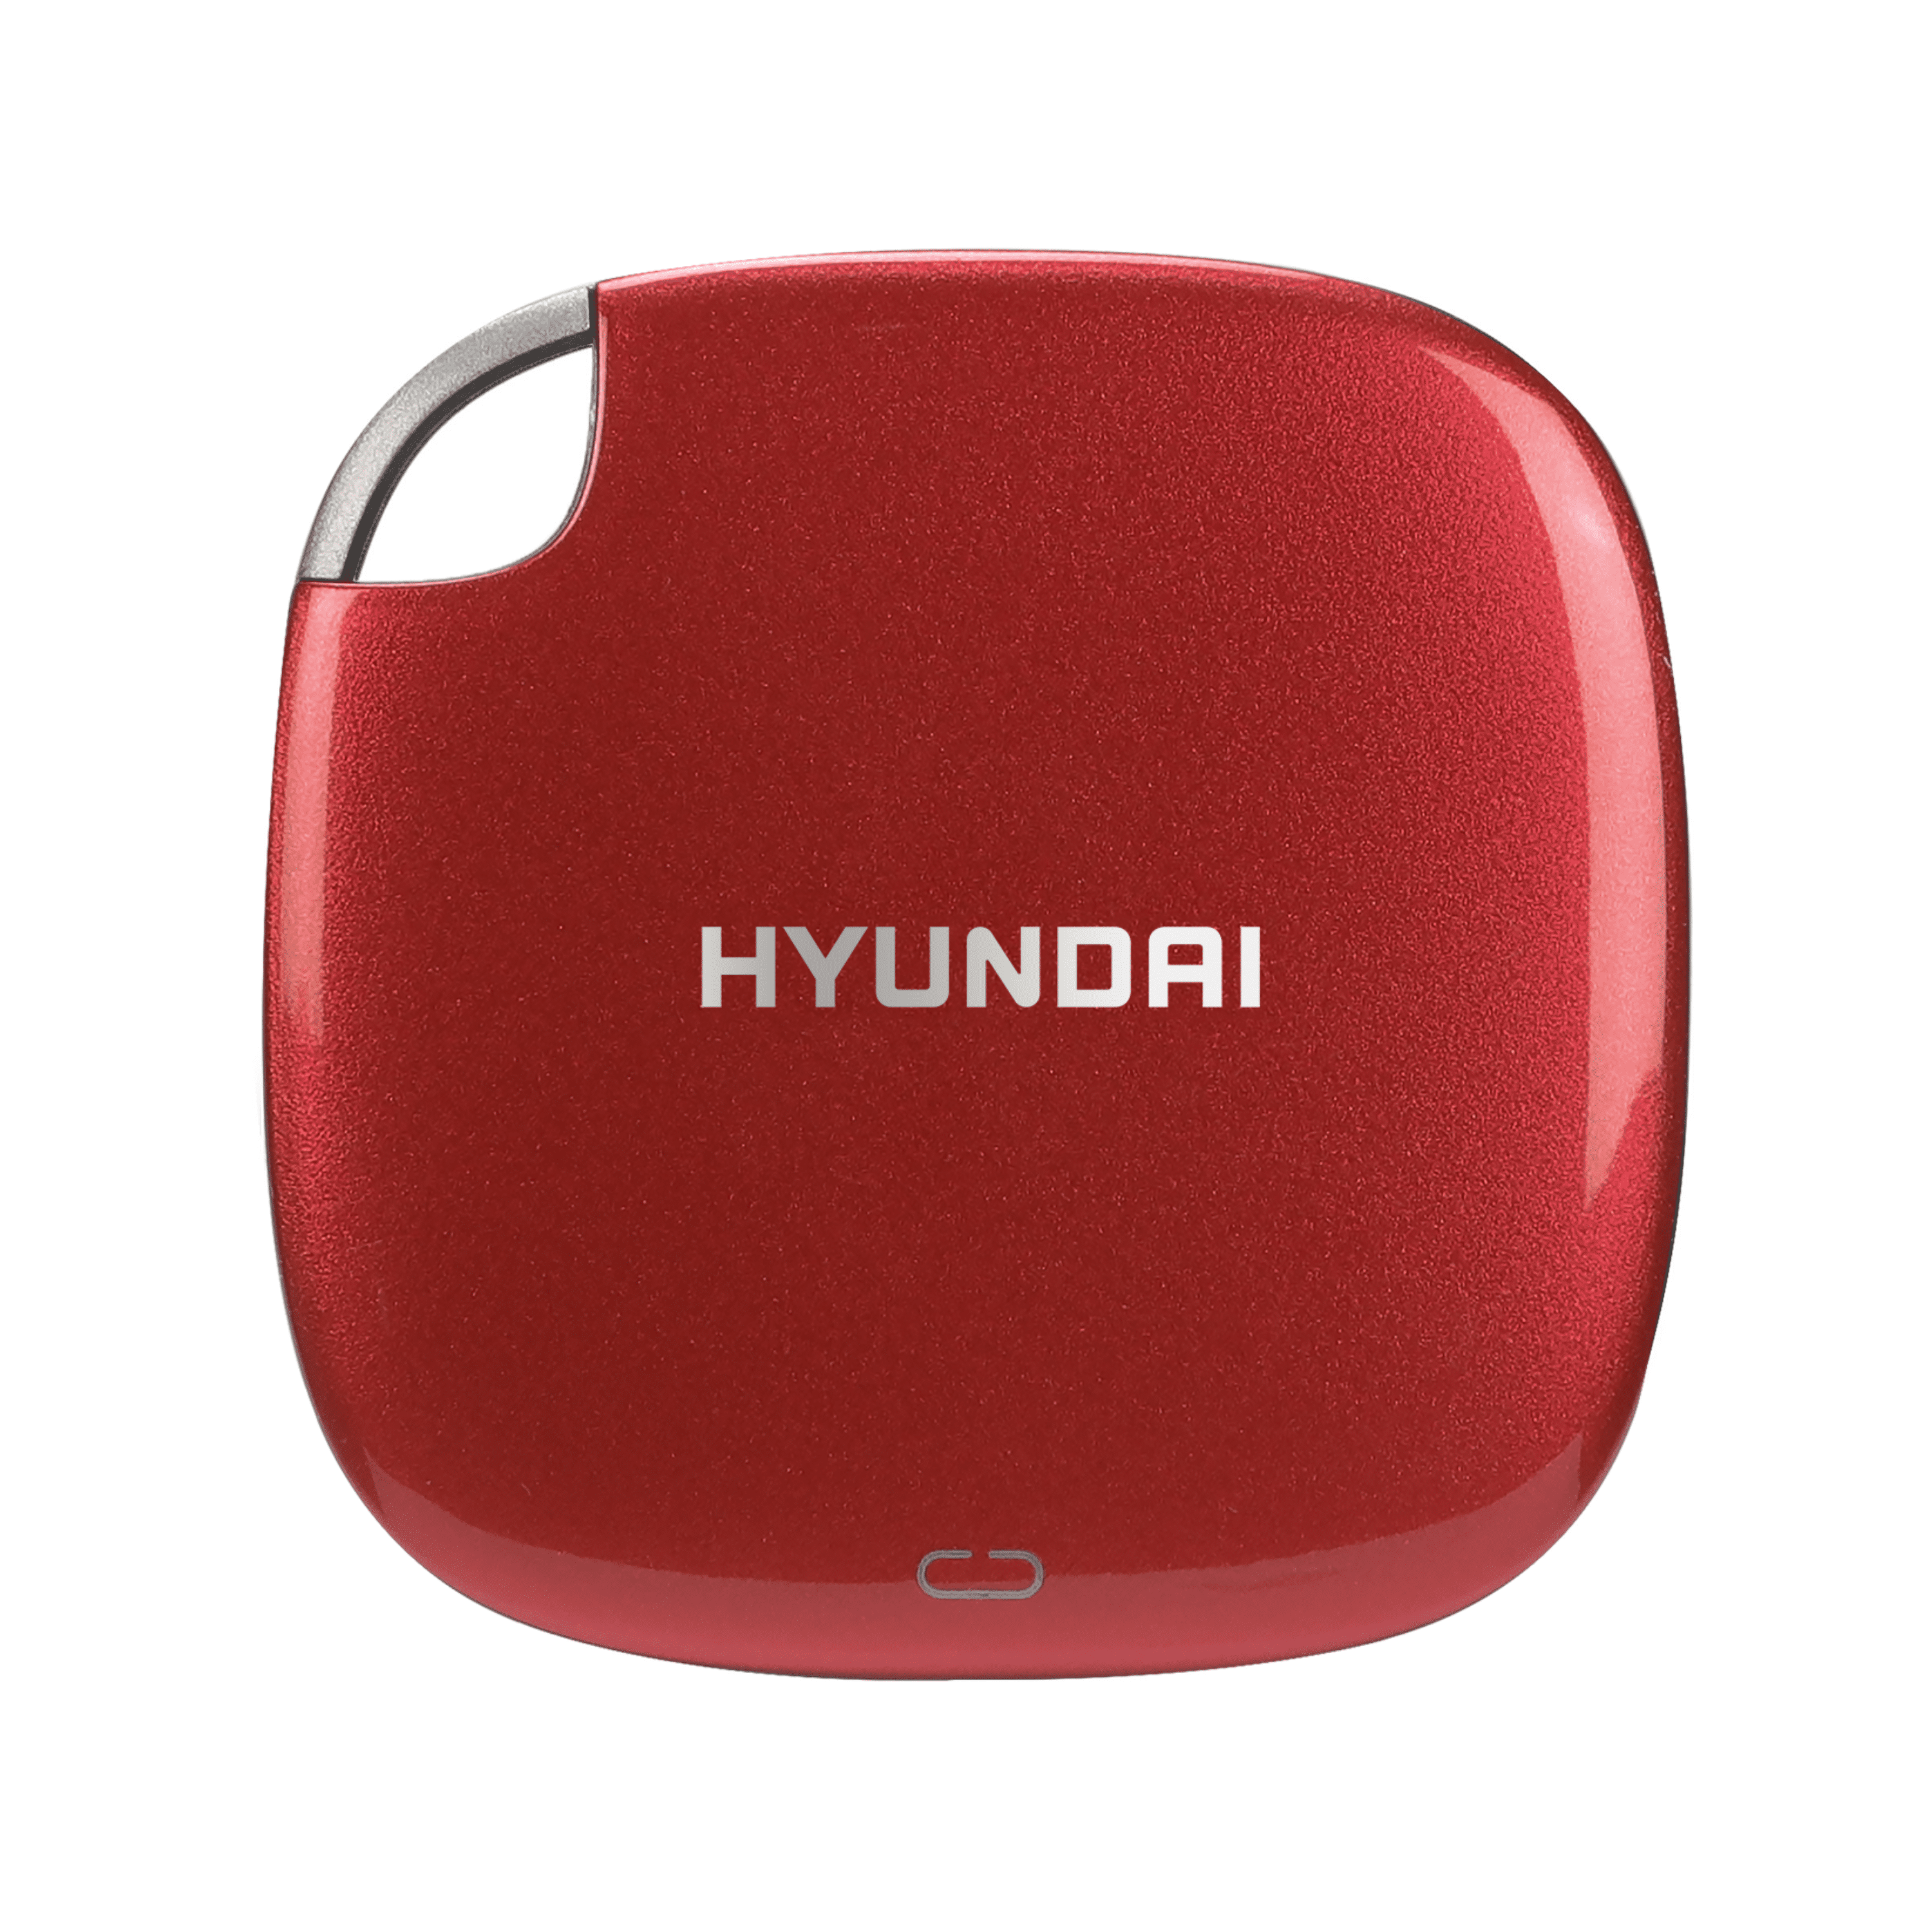 Hyundai 512GB Portable Data Storage Fast External SSD, PC/MAC/Mobile- USB-C/USB-A, Dual Cable Included, Candy Apple Red – HTESD500R Walmart.com